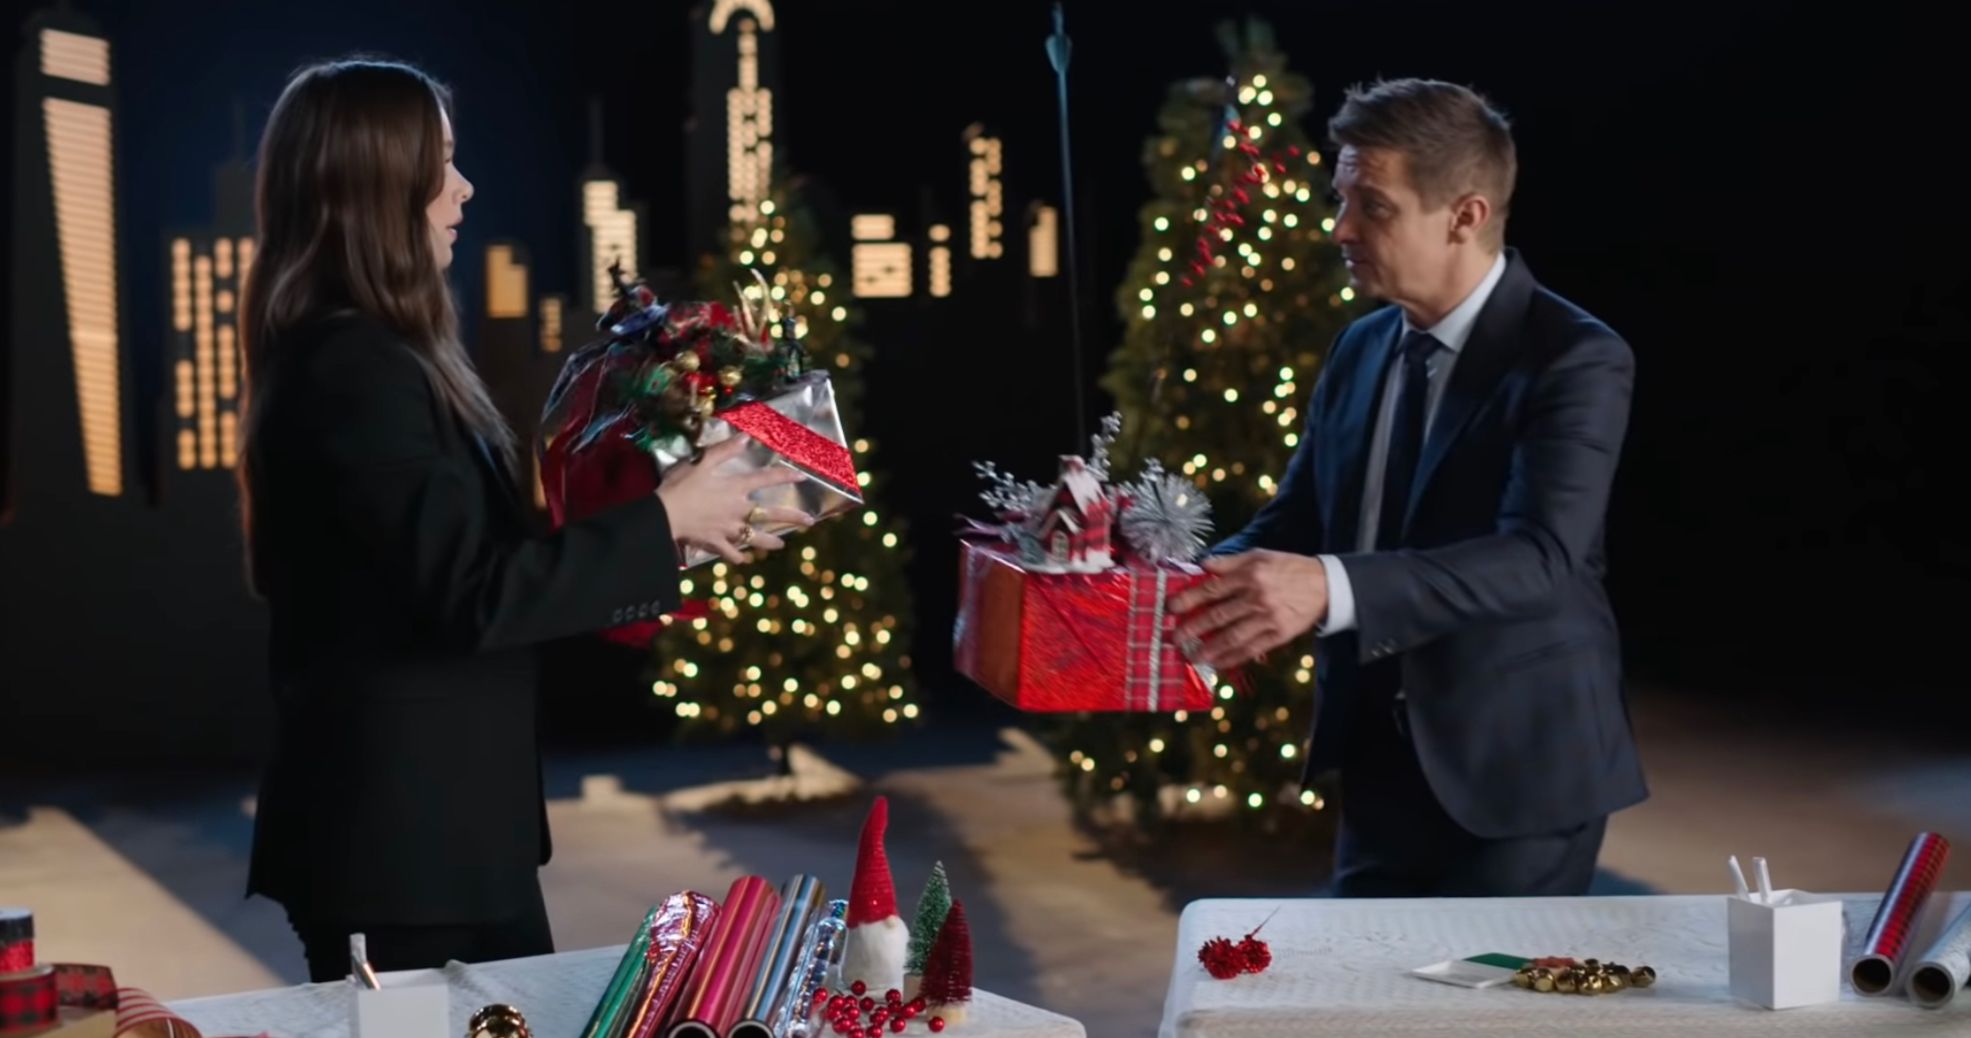 Hawkeye Gift Wrapping Challenge Puts Jeremy Renner &amp; Hailee Steinfeld's Holiday Skills to the Test